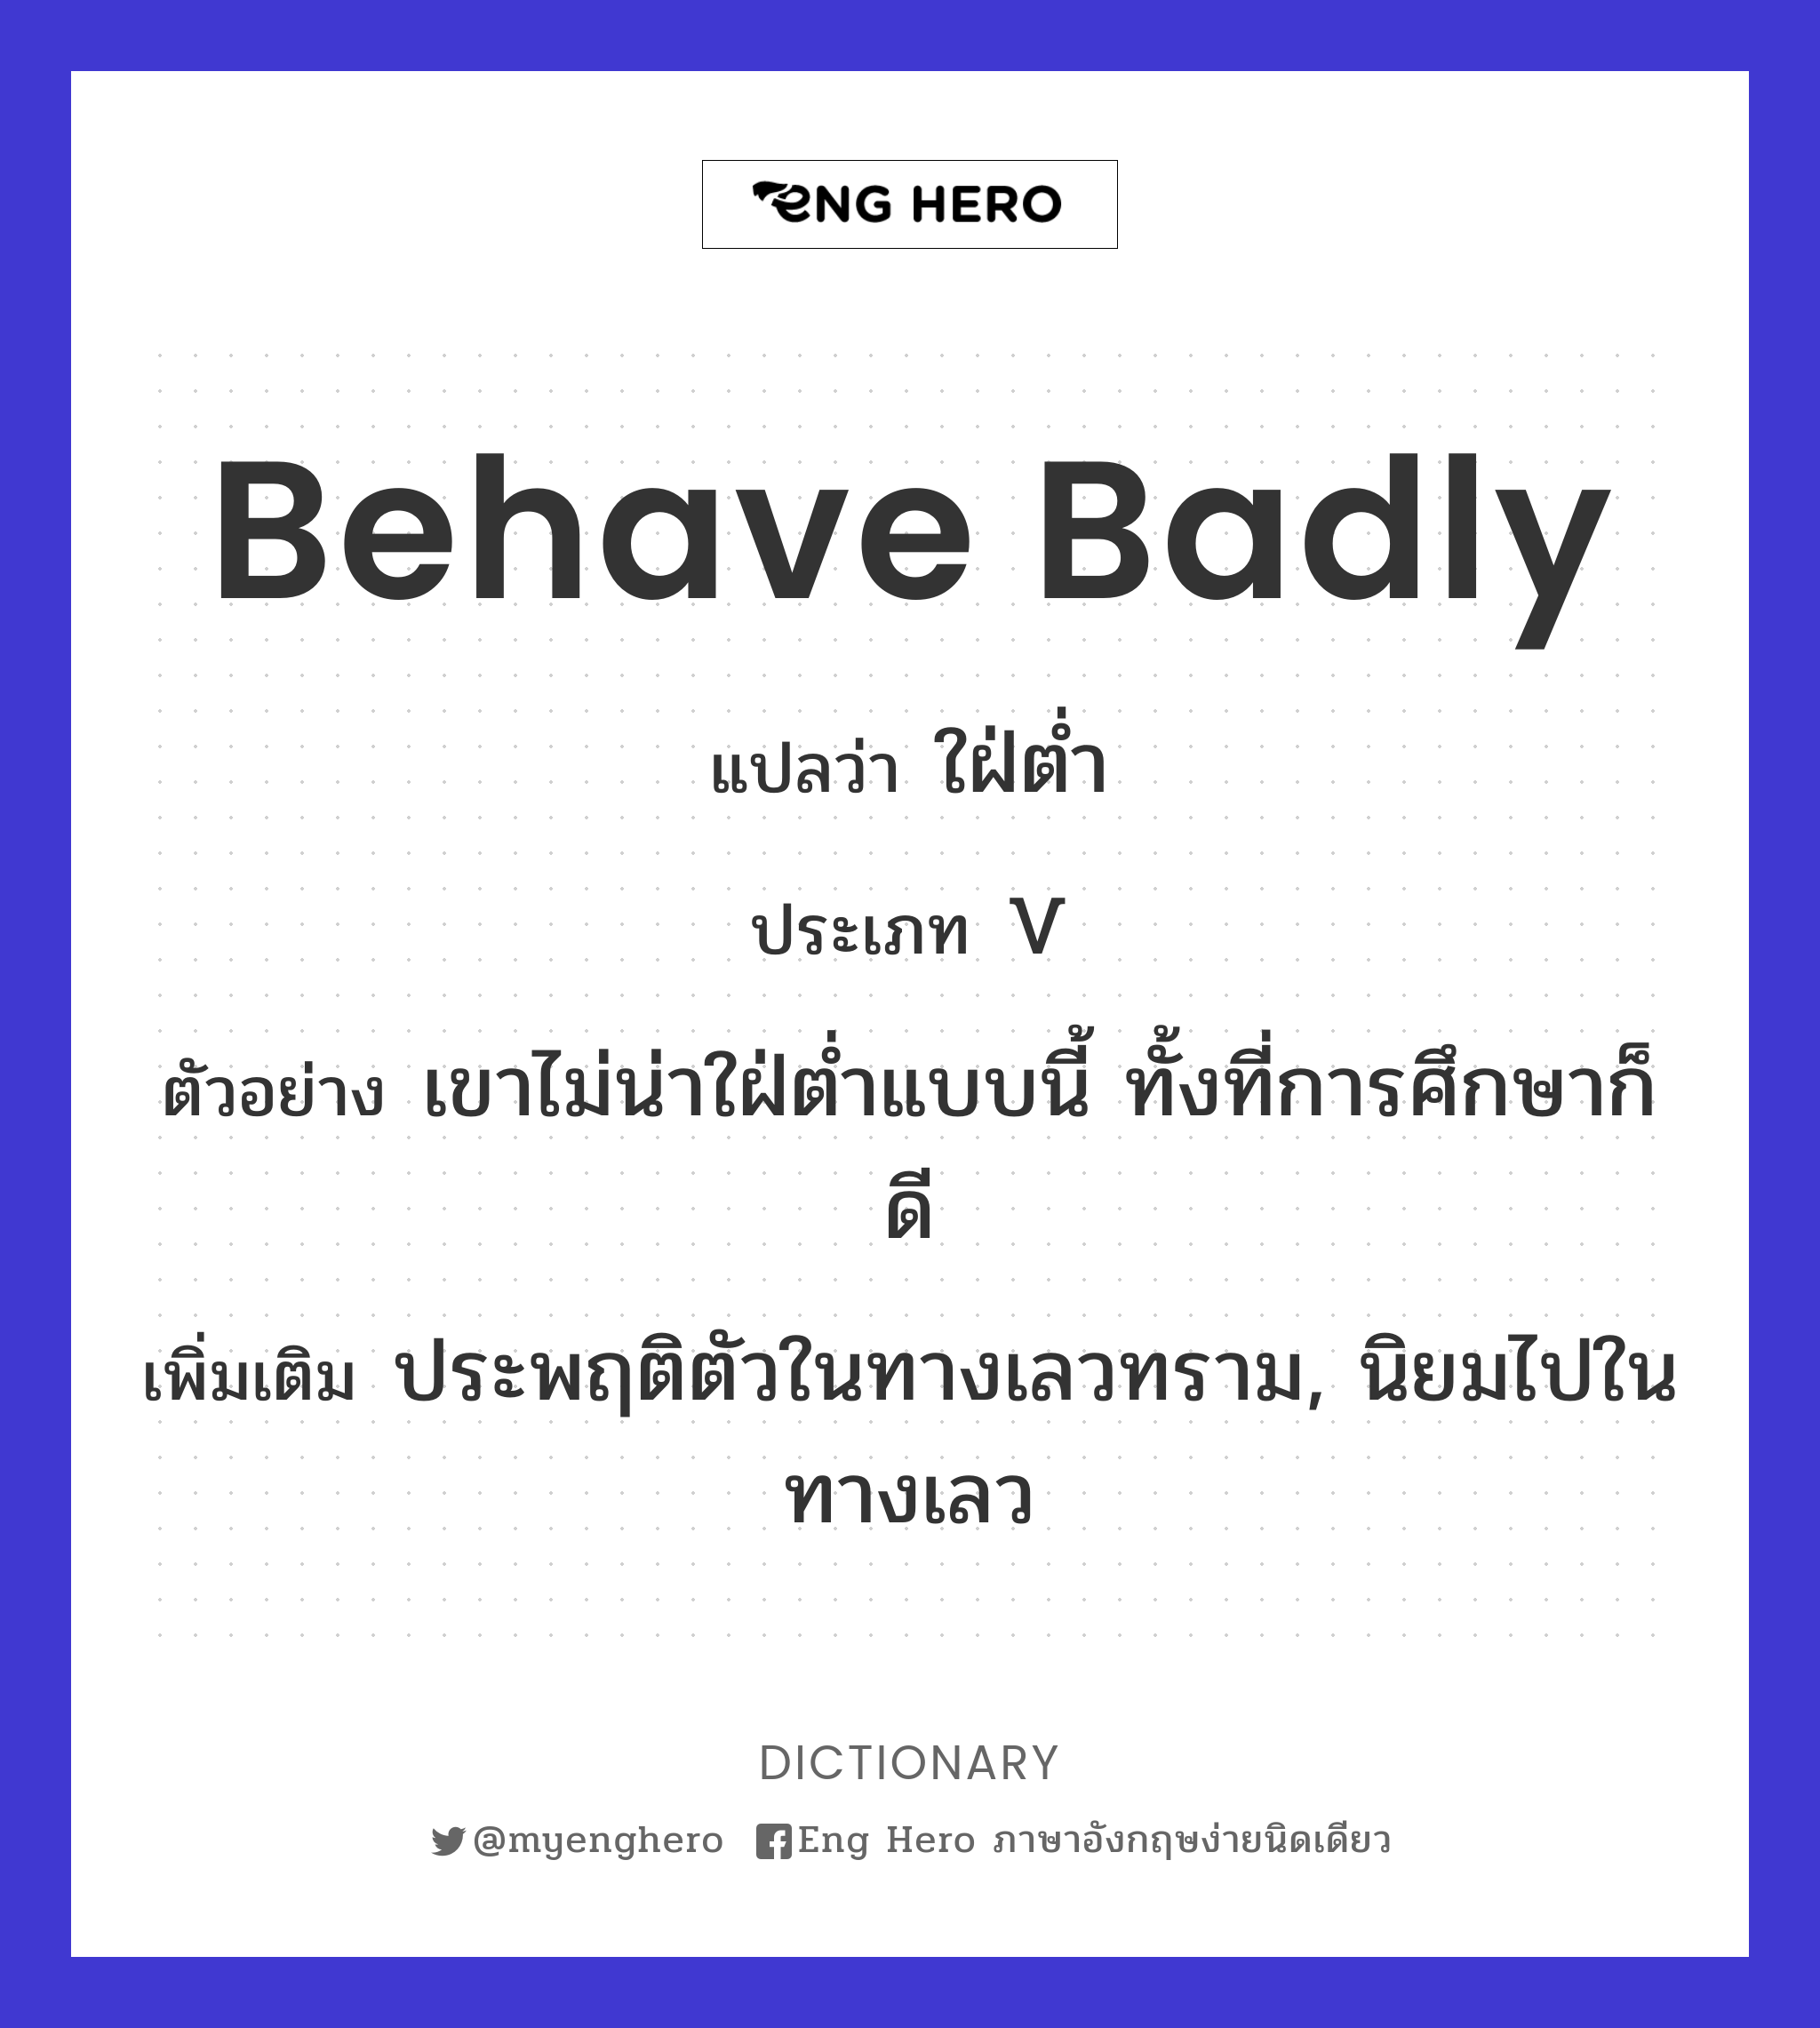 behave badly